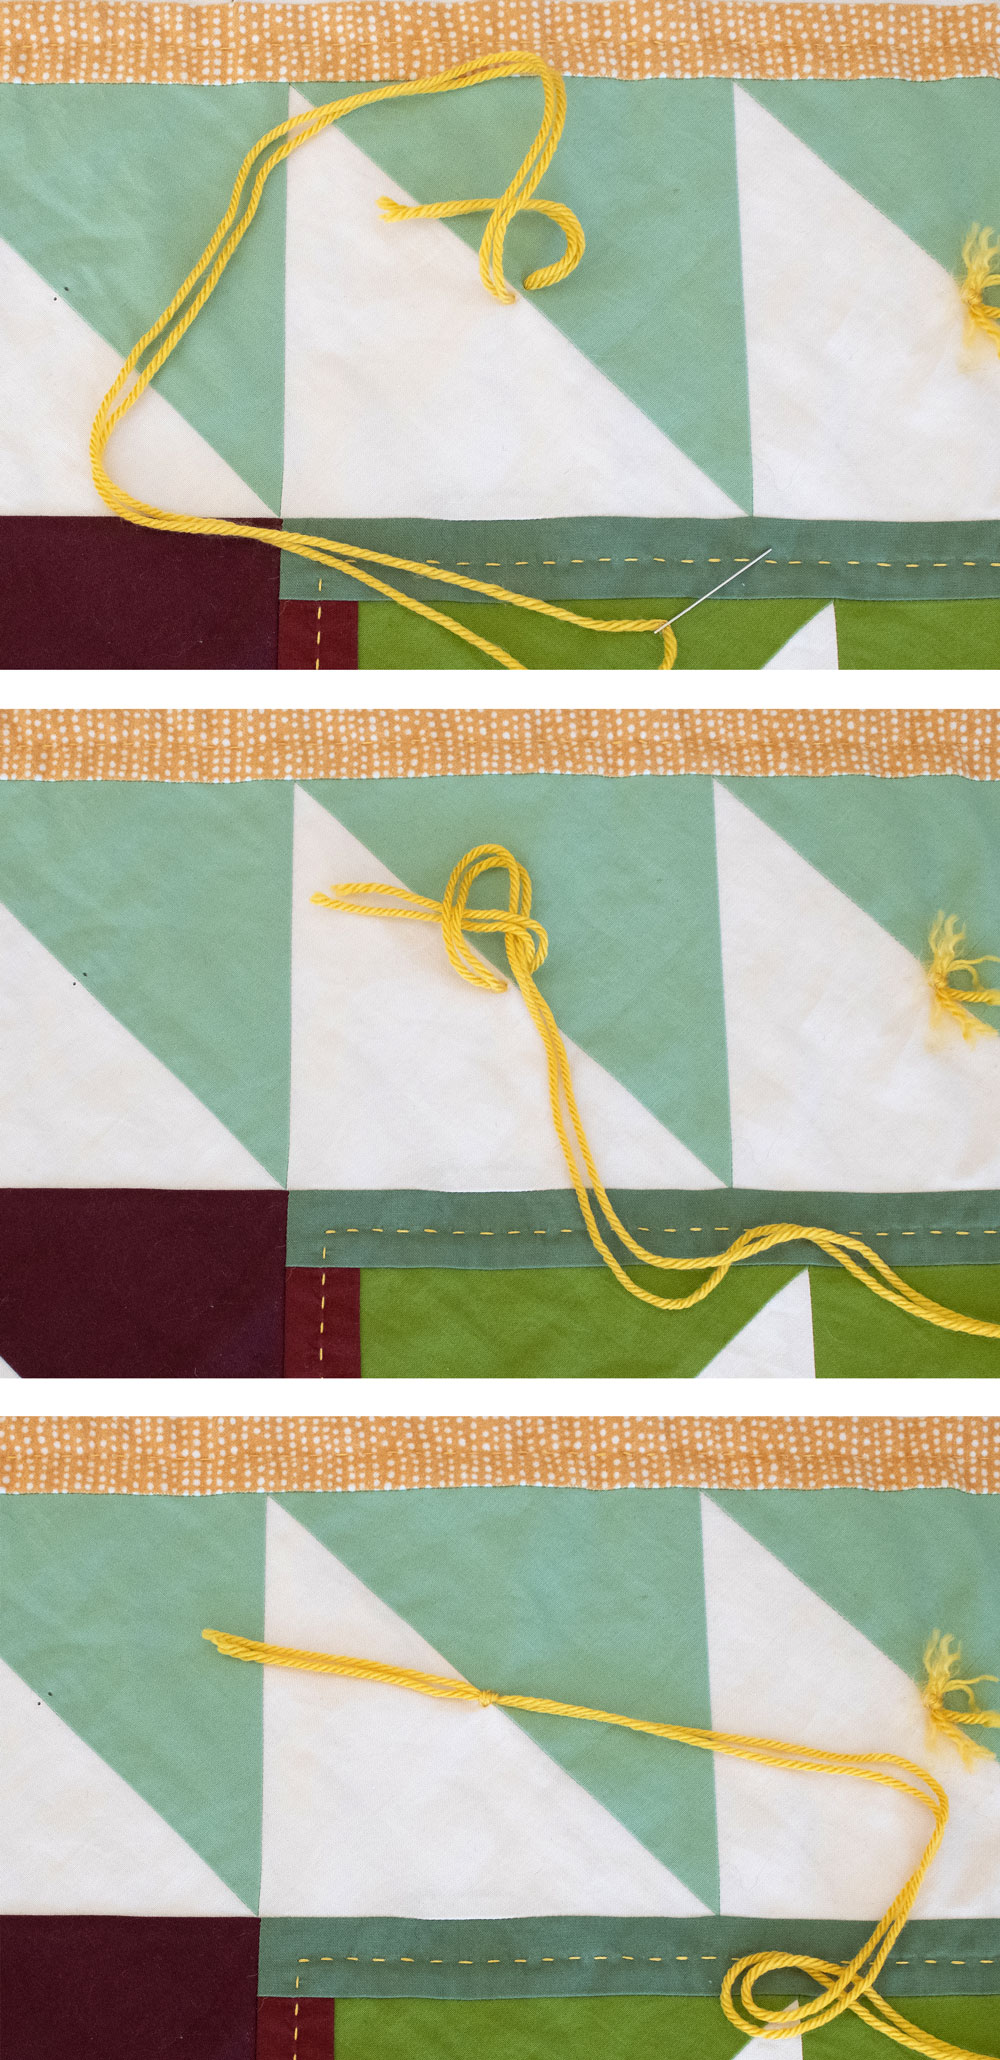 This quilt tying tutorial shows how to tie a quilt with yarn or embroidery thread. Quilt ties is an easy and fast way to finish a quilt. suzyquilts.com #quilting #quiltingtutorial